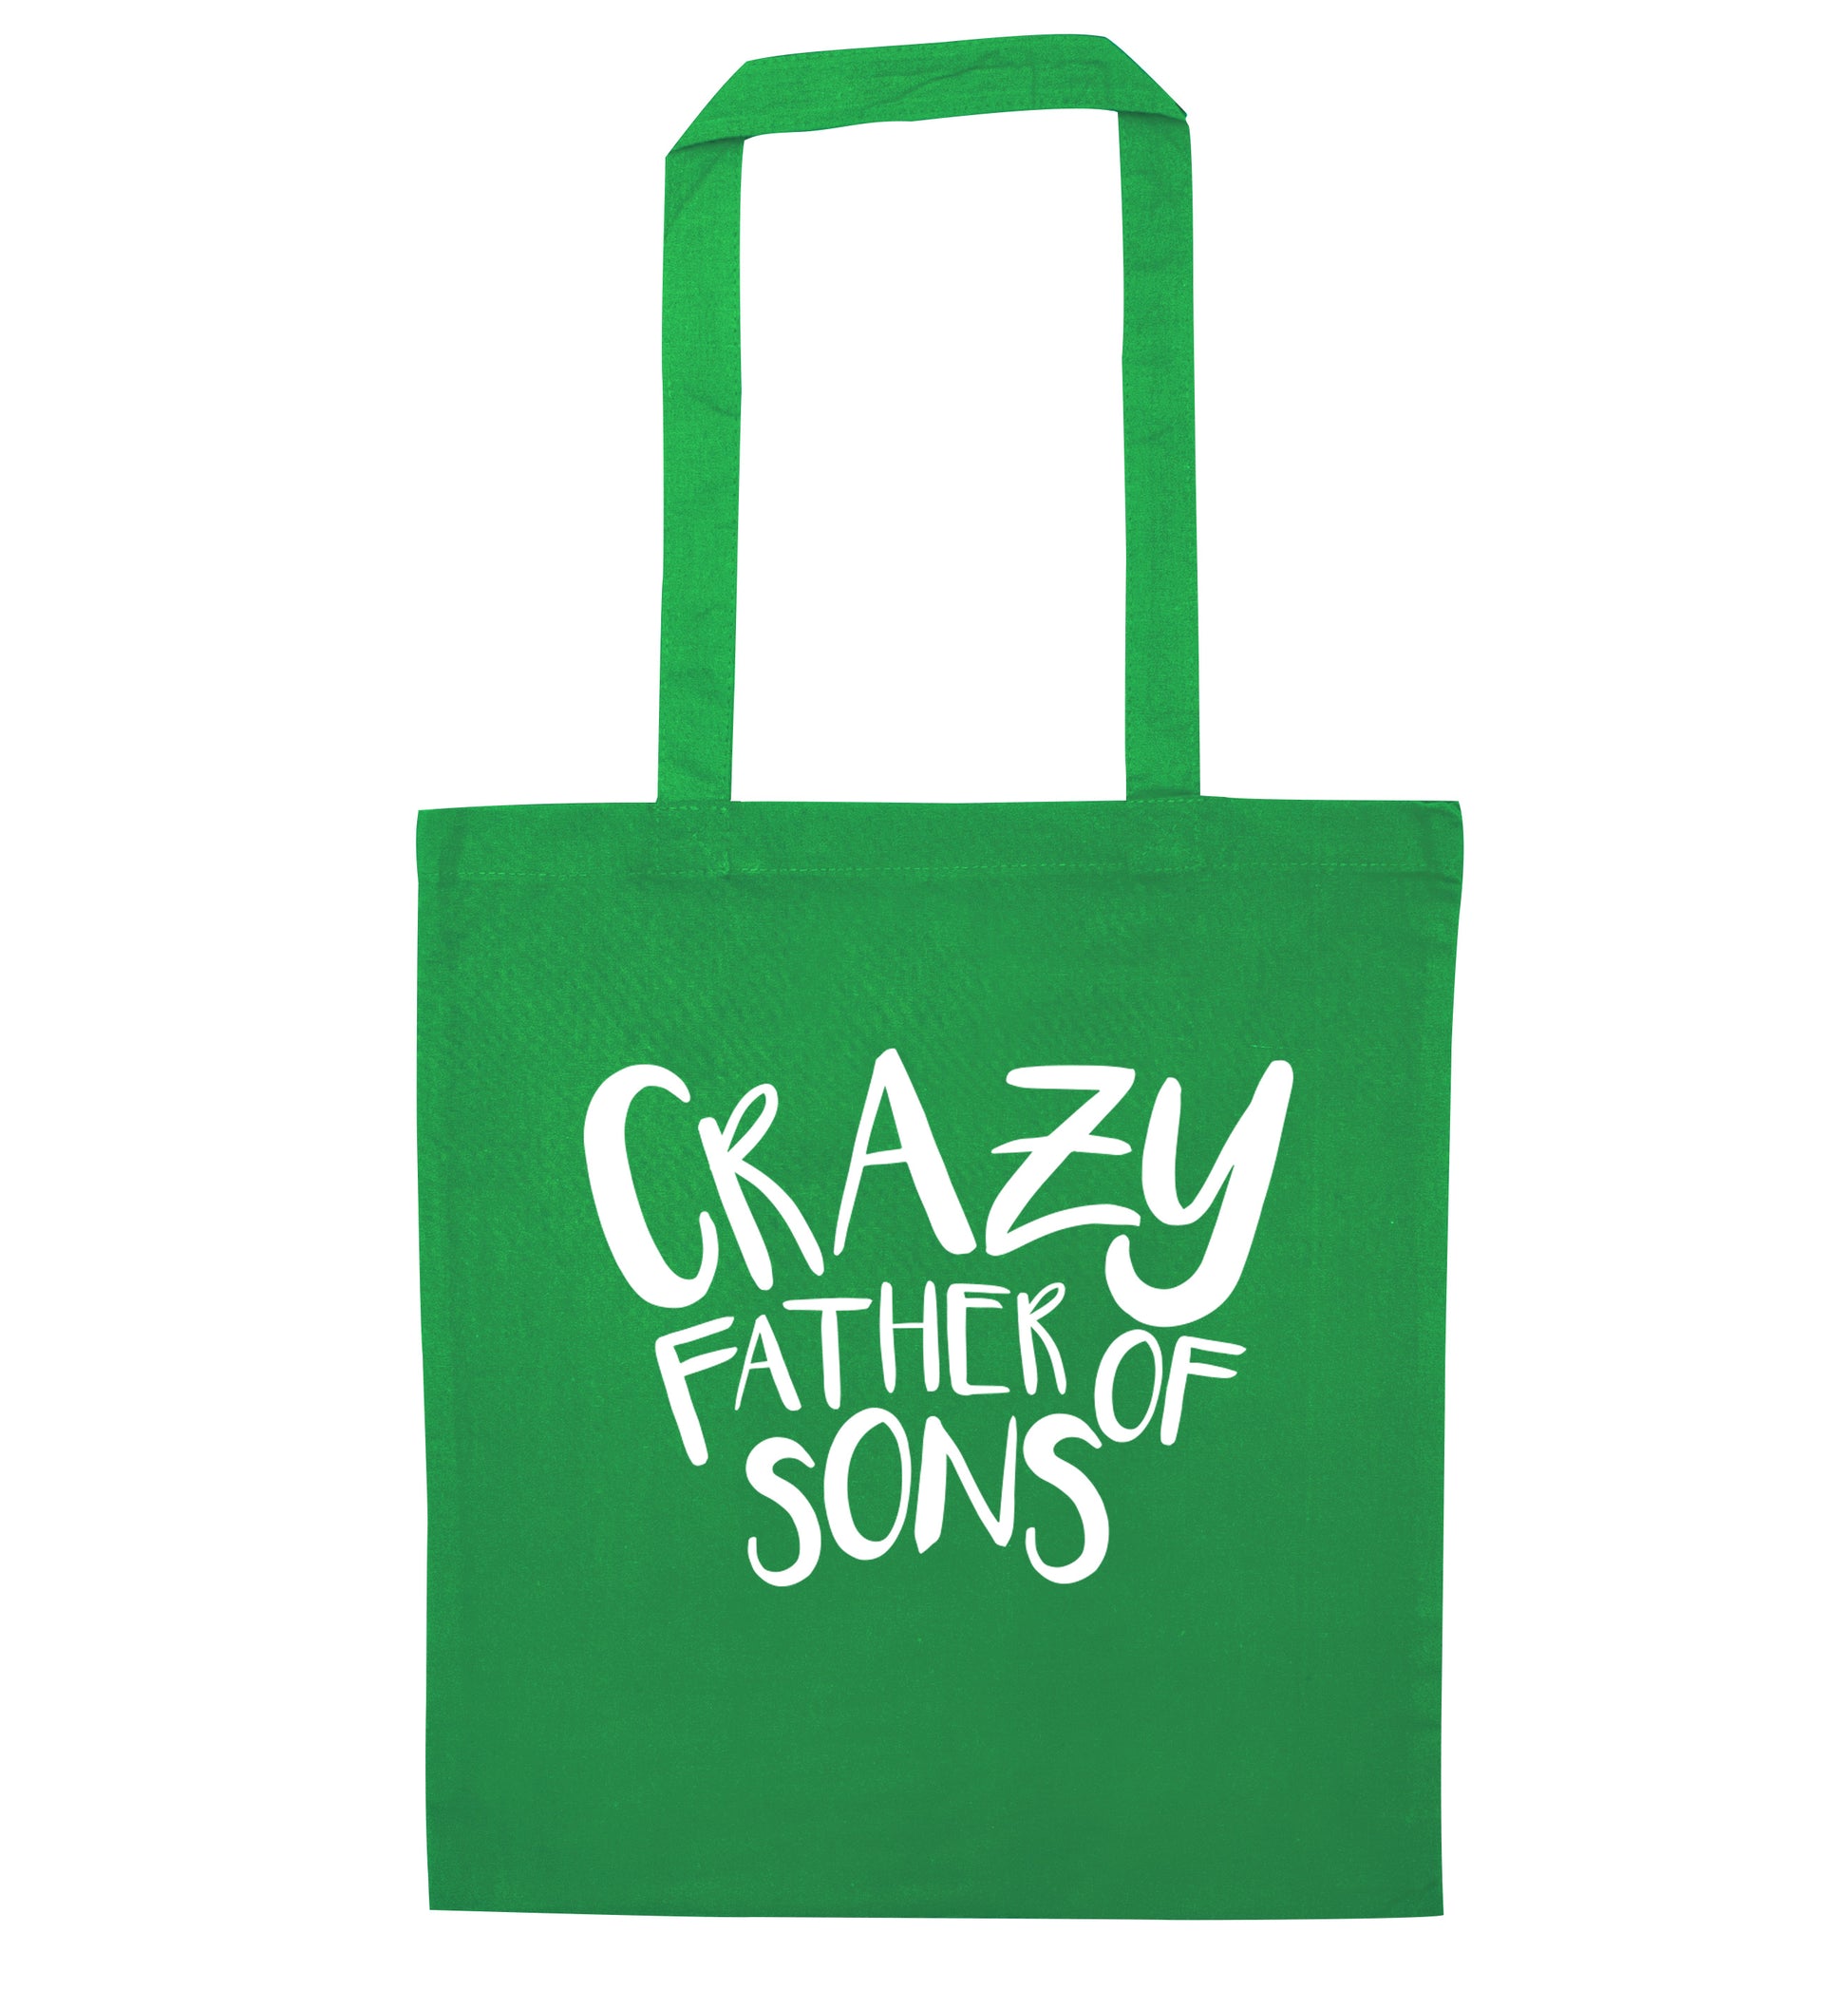 Crazy father of sons green tote bag